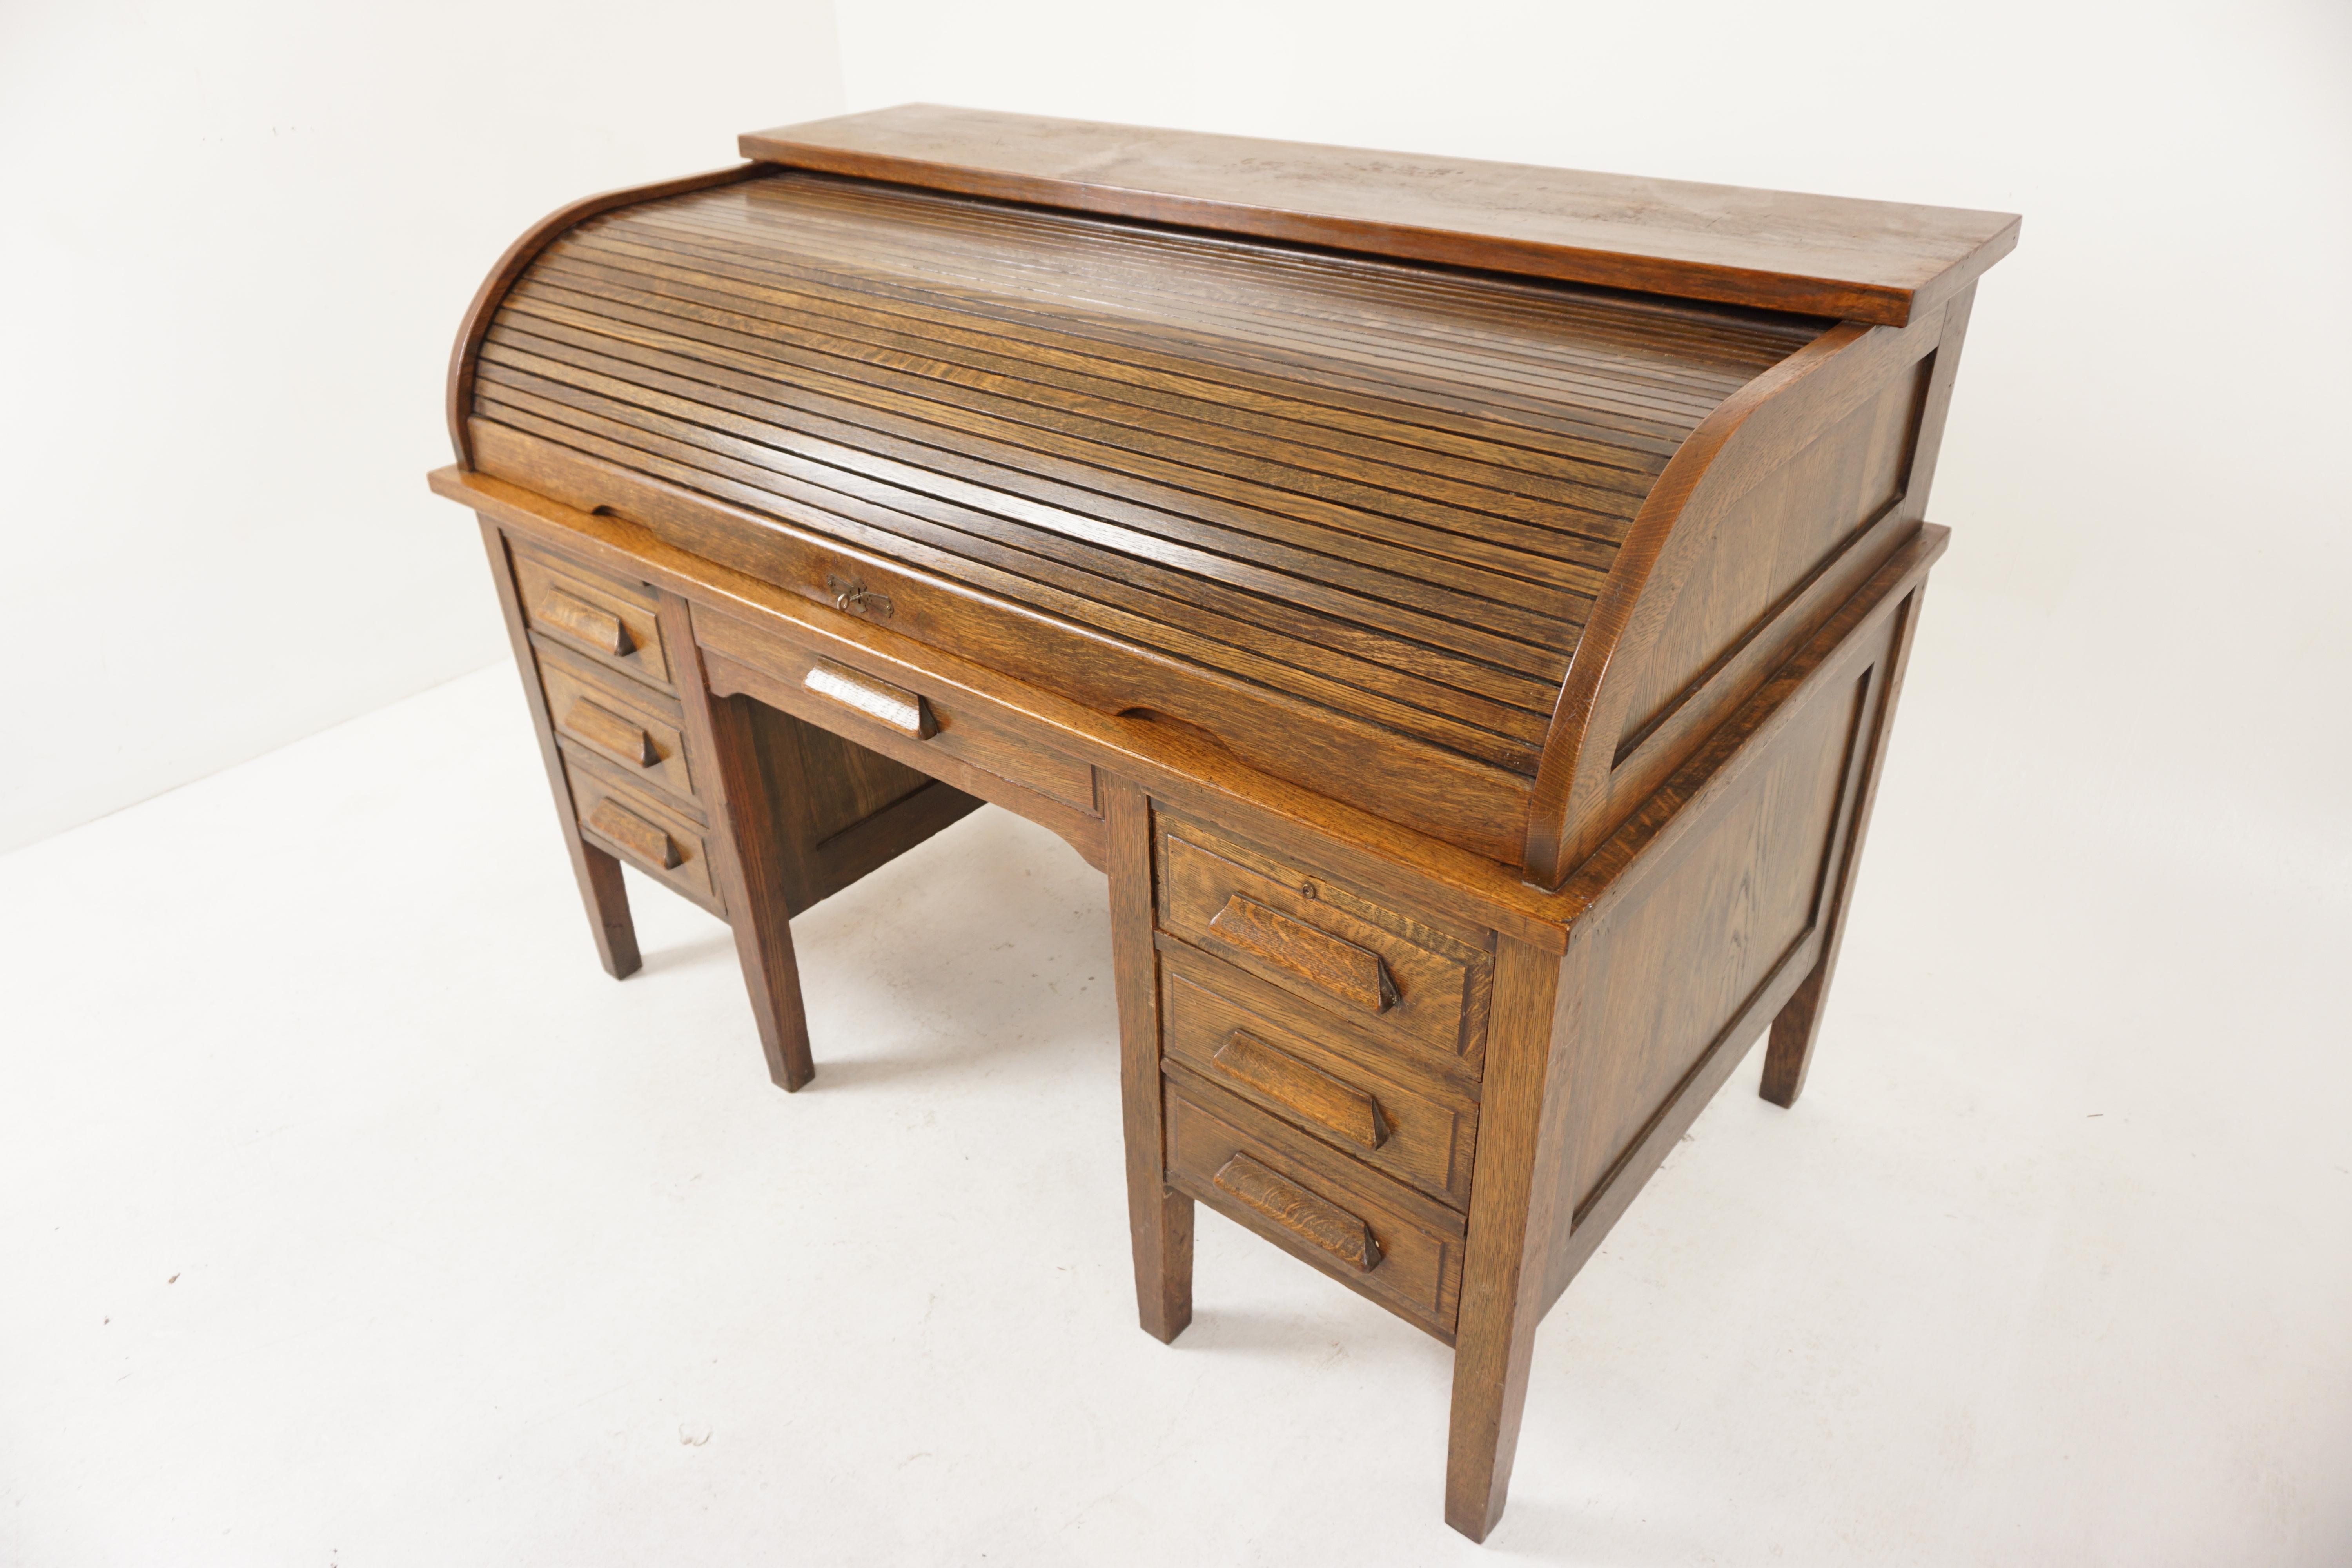 Large Oak Panelled Roll Top Desk, Scotland 1920, H1182

Scotland 1920
Solid oak 
Original Finish
Rectangular moulded top
With tambour front
Opening to reveal numerous drawers and pigeon holes
The front with three drawers to the left and two to the